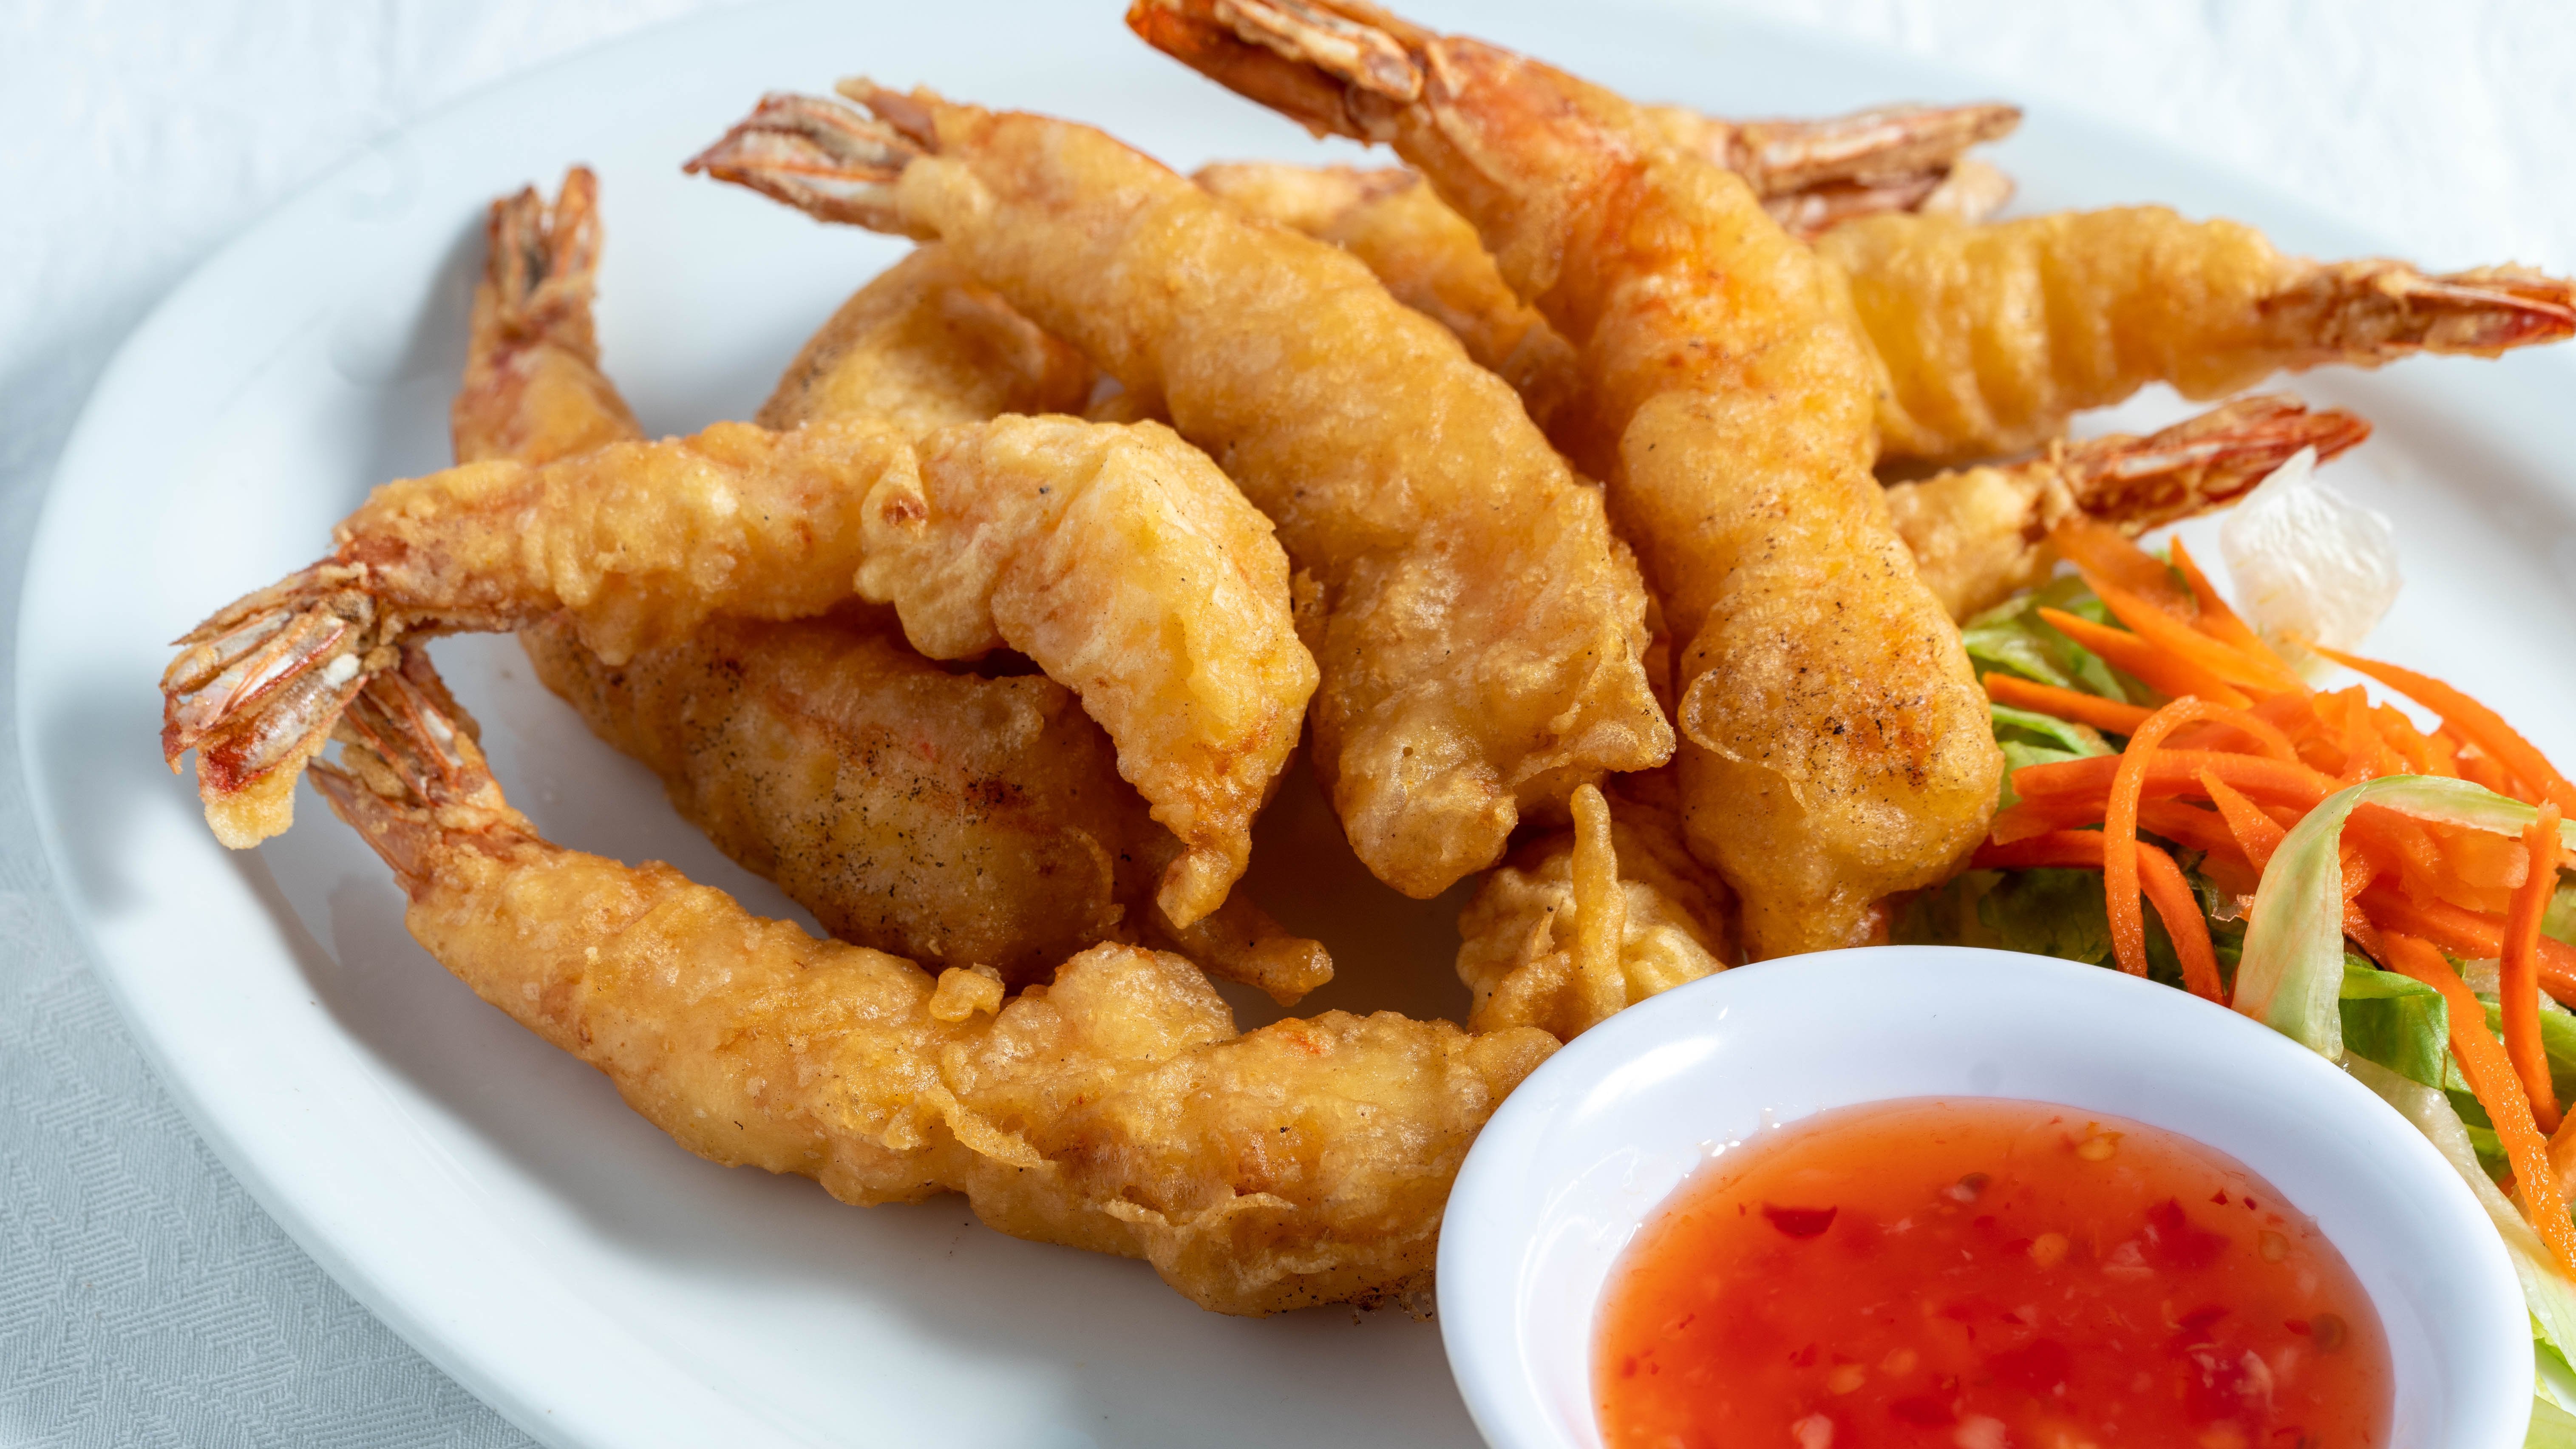 Fried Seafood and Chicken